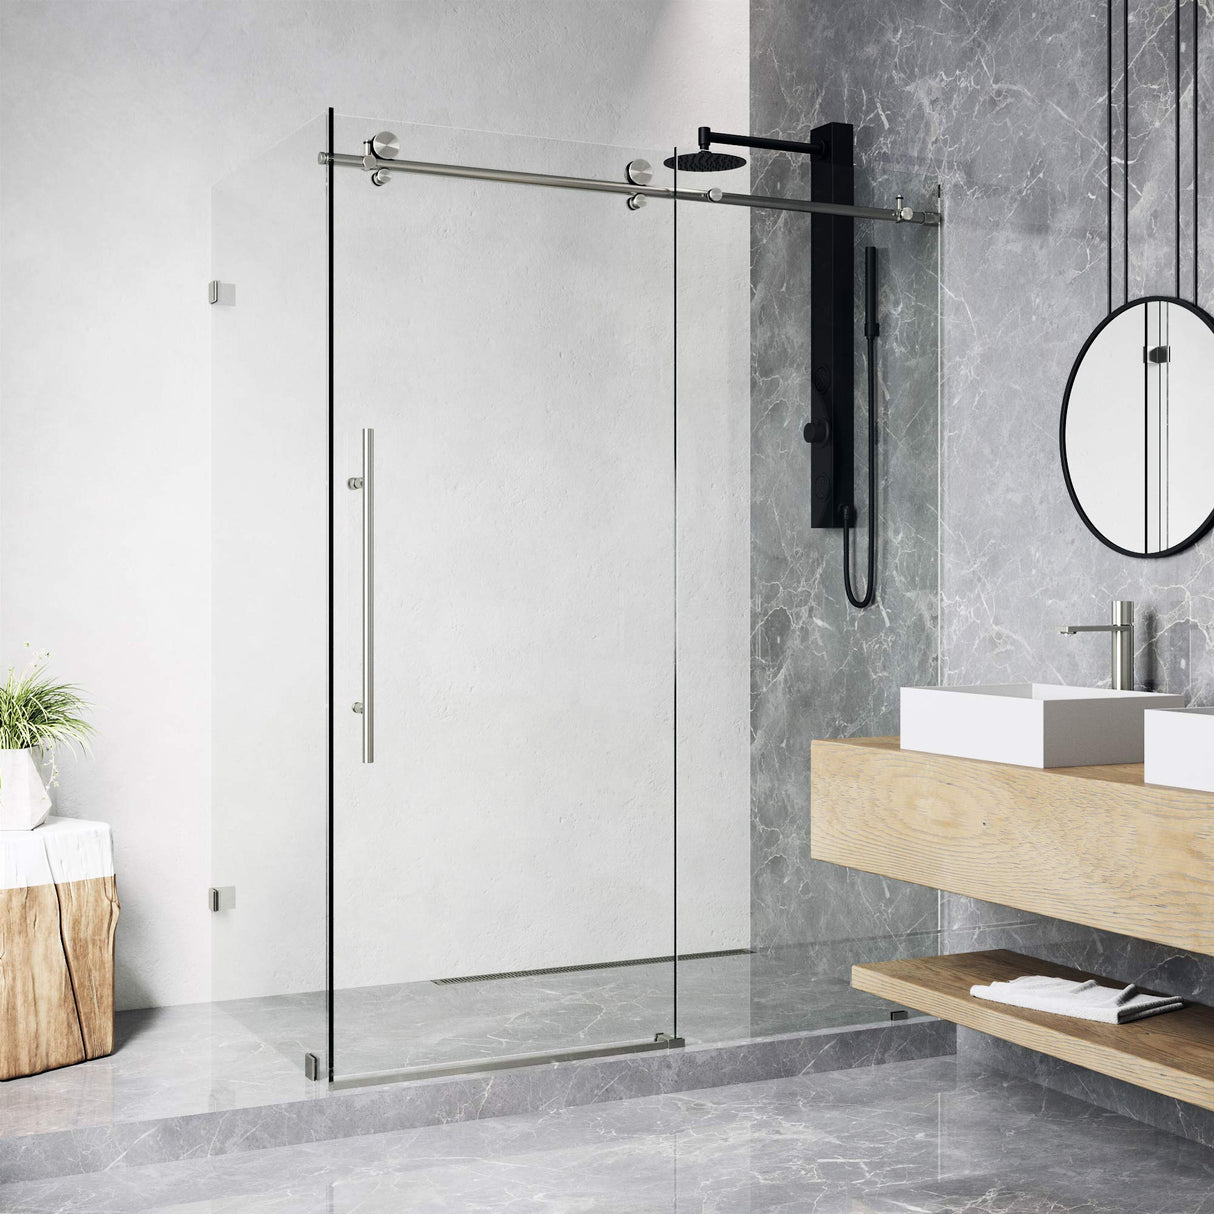 VIGO 46"W x 76"H Elan E-Class Frameless Sliding Rectangle Shower Enclosure with Clear Tempered Glass, Reversible Door Handle and Stainless Steel Hardware in Stainless Steel-VG6053STCL48